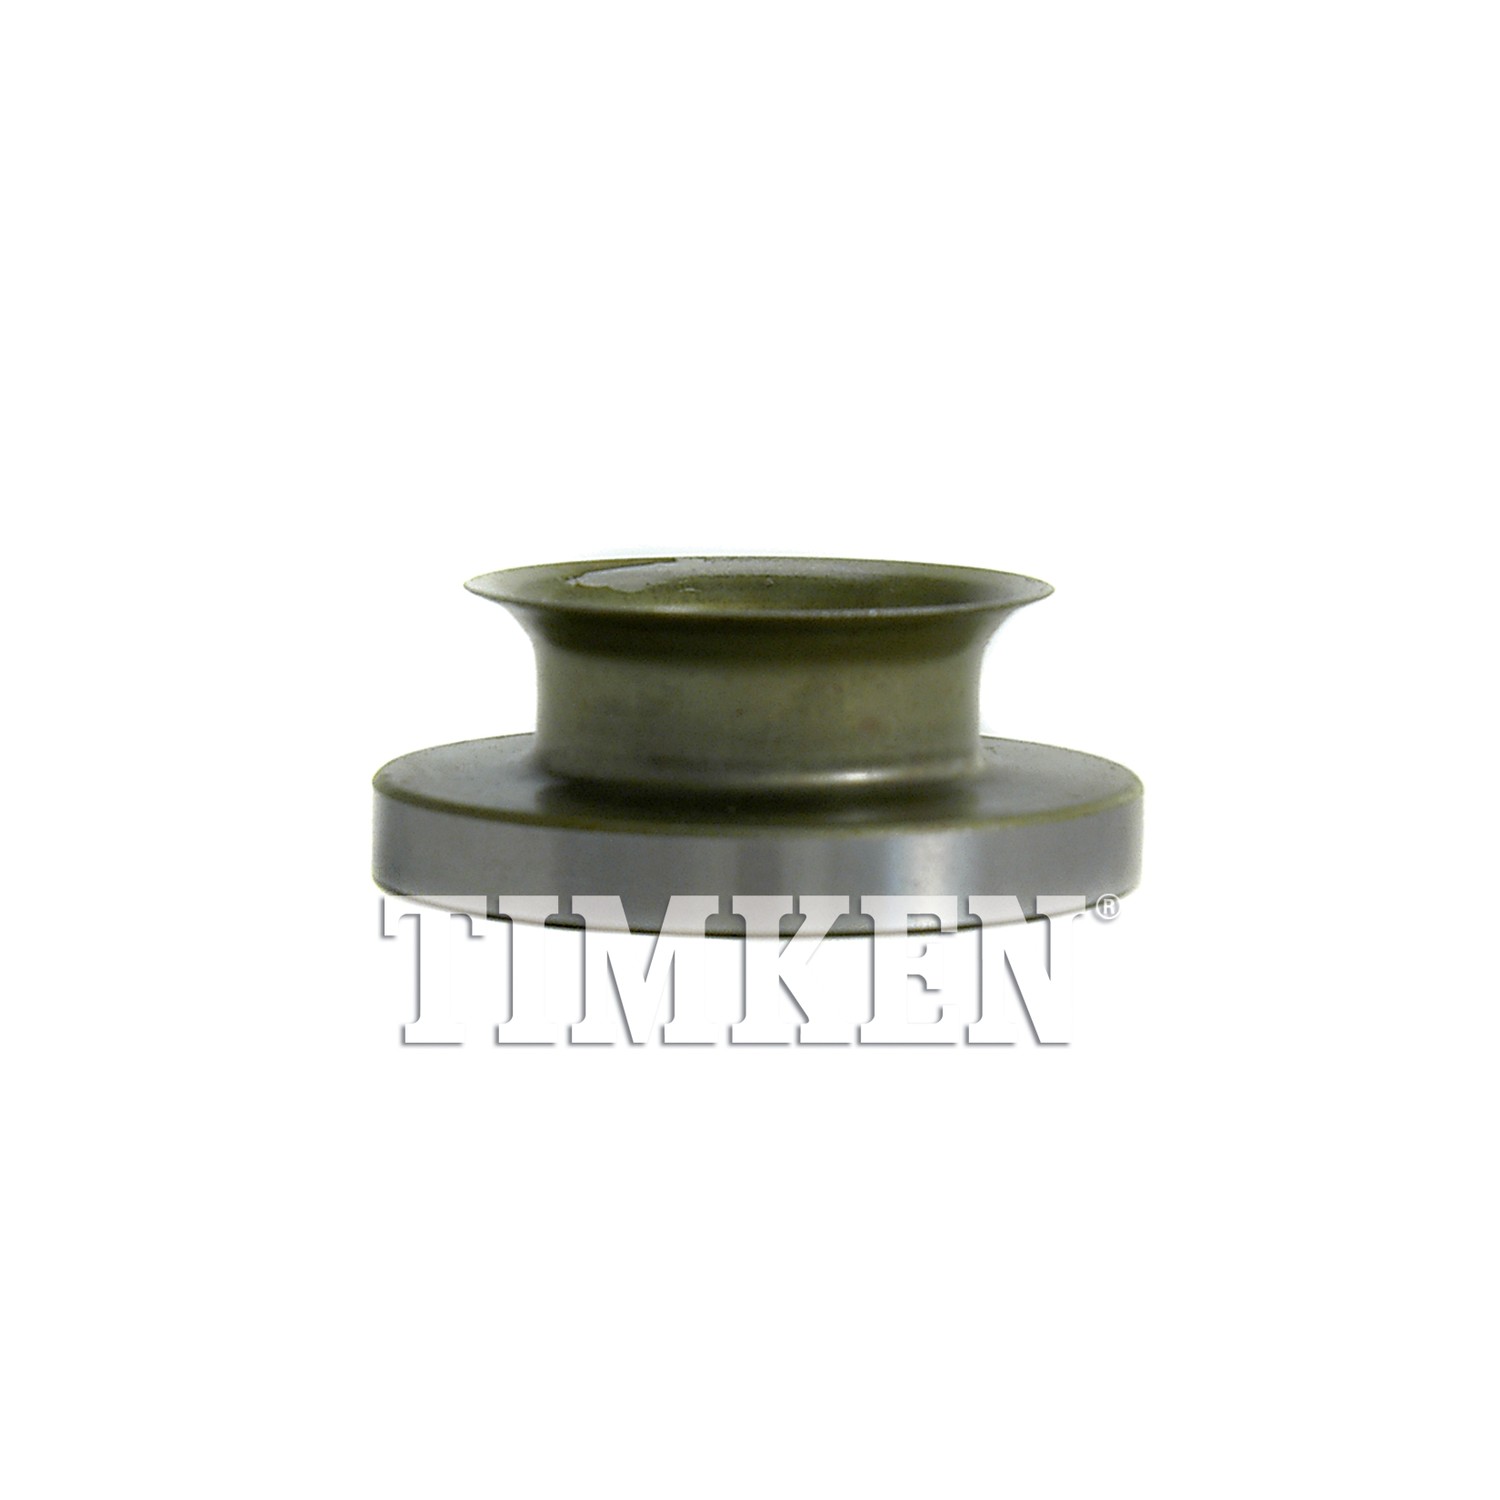 TIMKEN - Differential Seal (Front) - TIM 2300